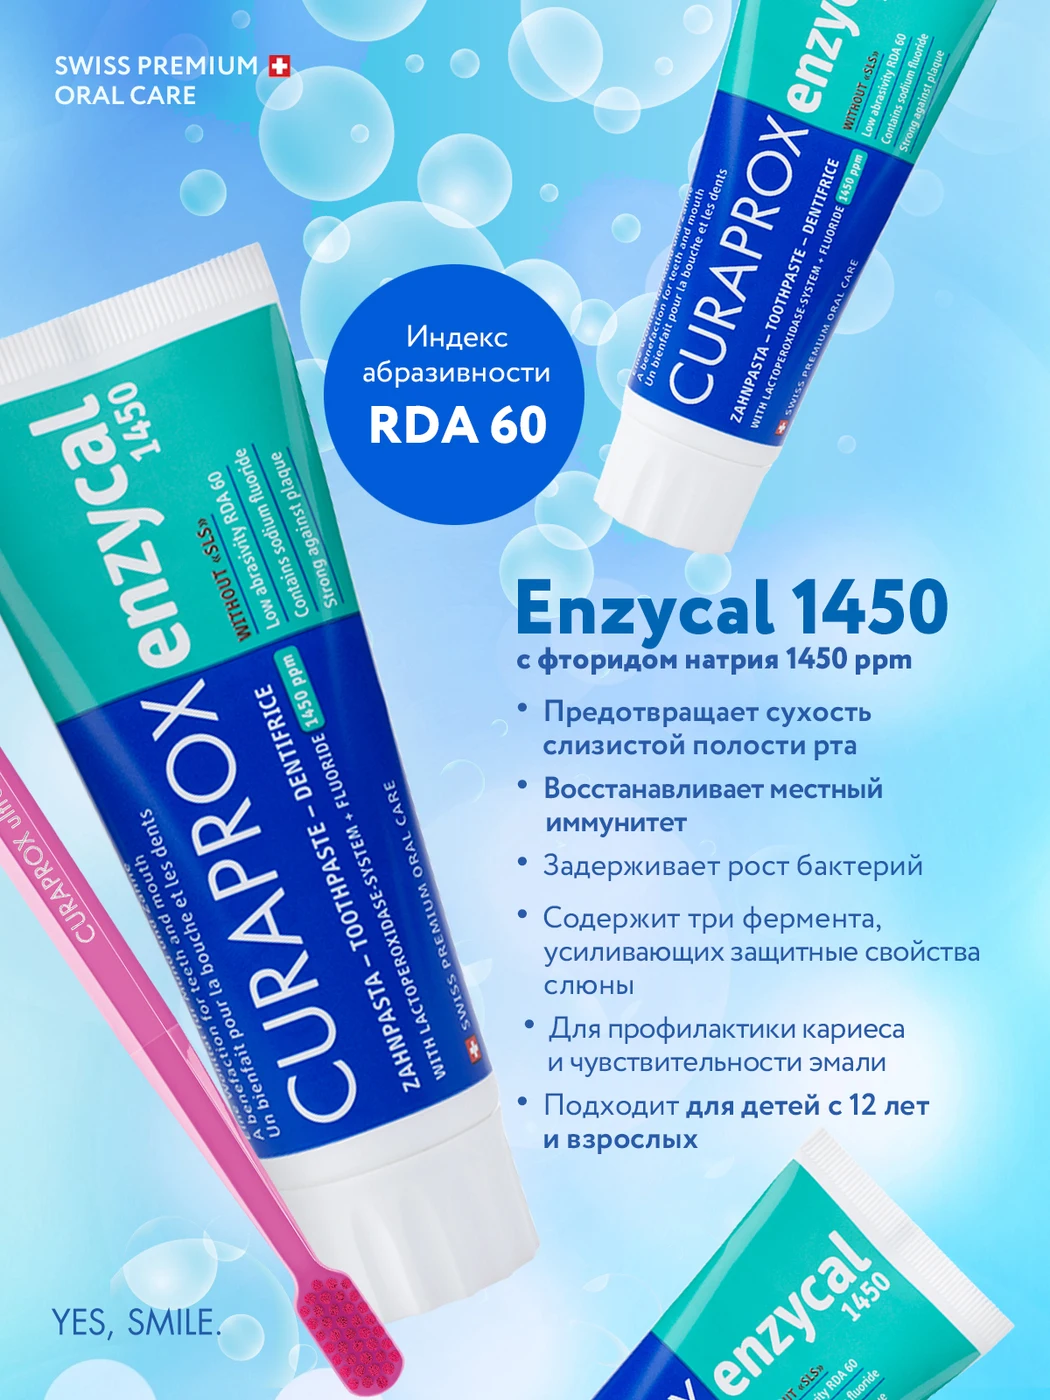 Фтор 1450. Curaprox Enzycal 1450. Enzycal 1450 зубная паста. Зубная паста Curaprox Enzycal 1450, 75 мл. Зубная паста curaproks ppm 1450.